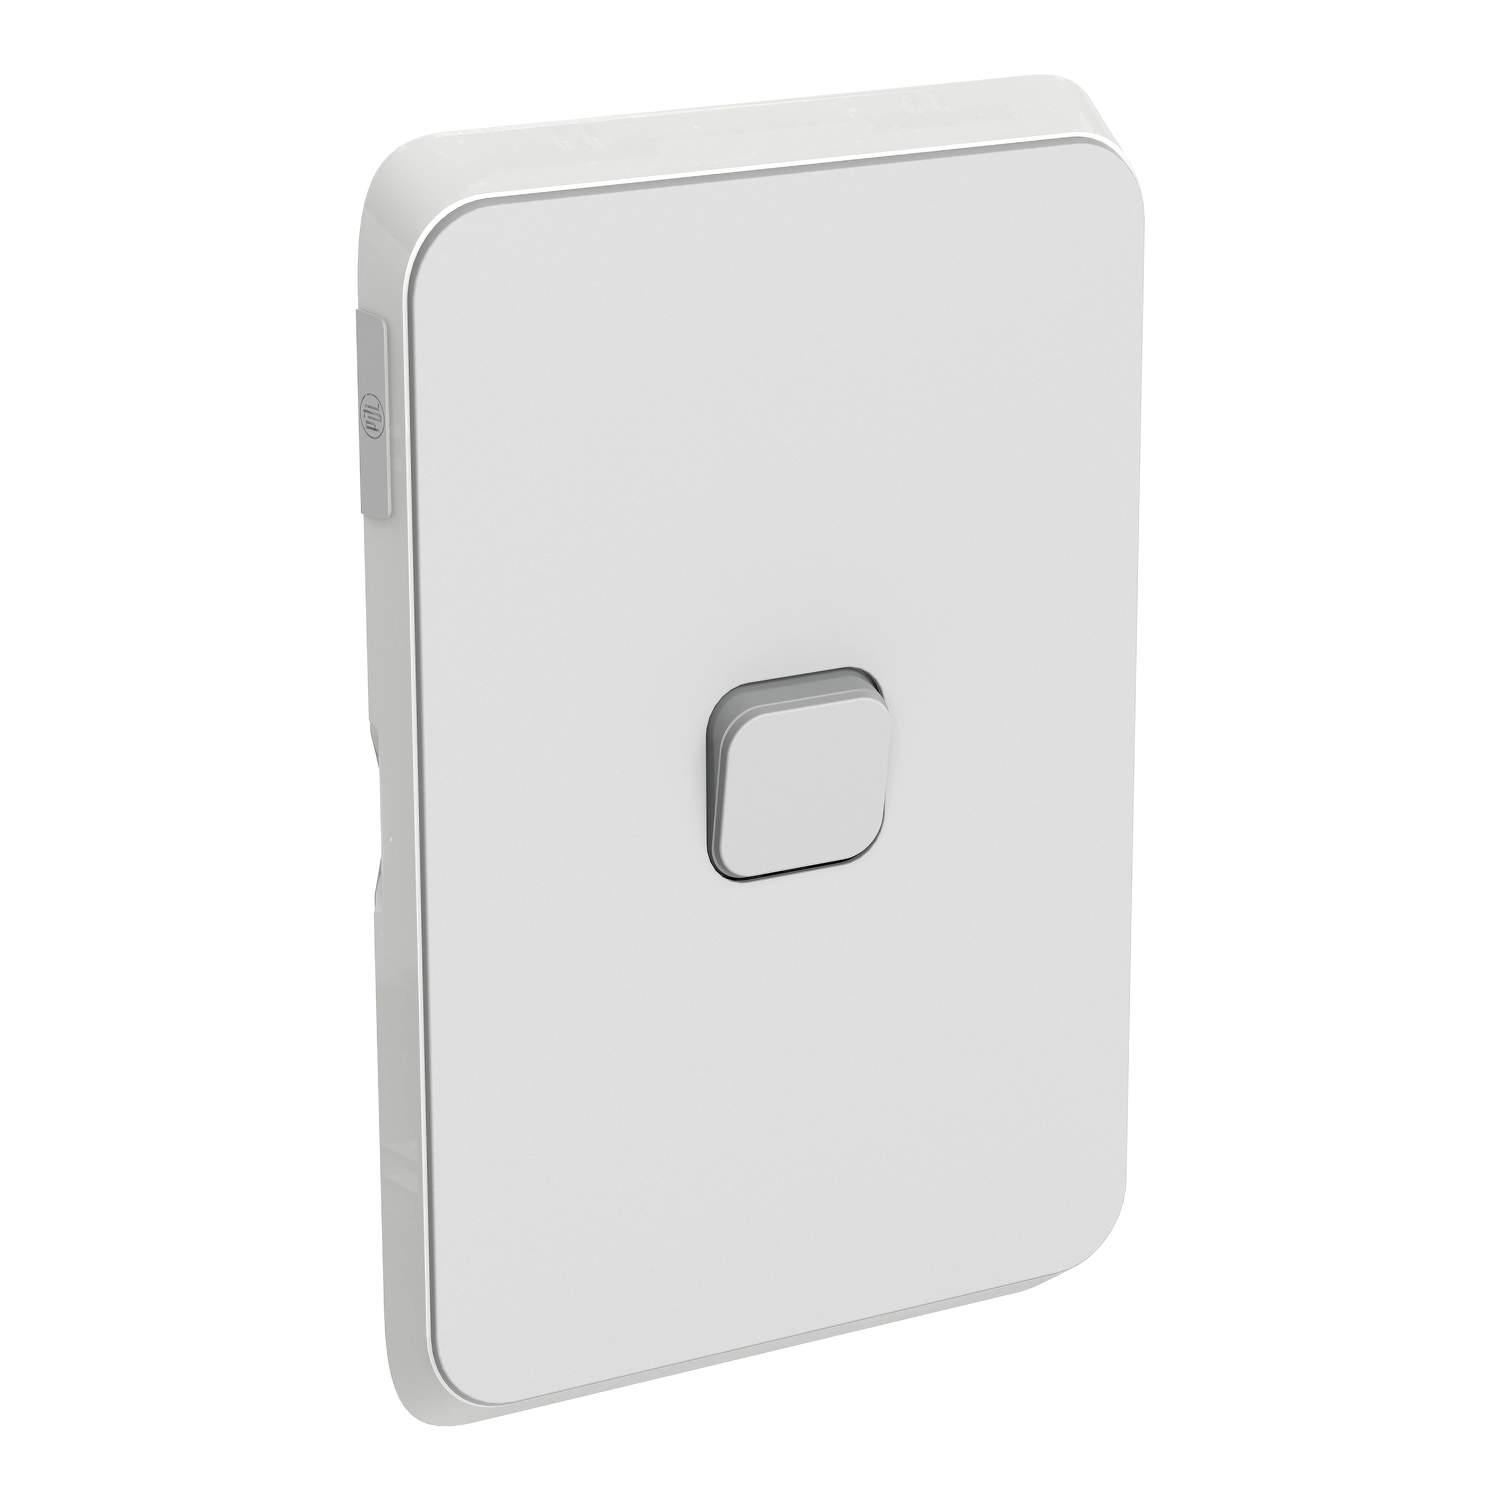 PDL Iconic - Cover Plate Switch 1-Gang - Cool Grey